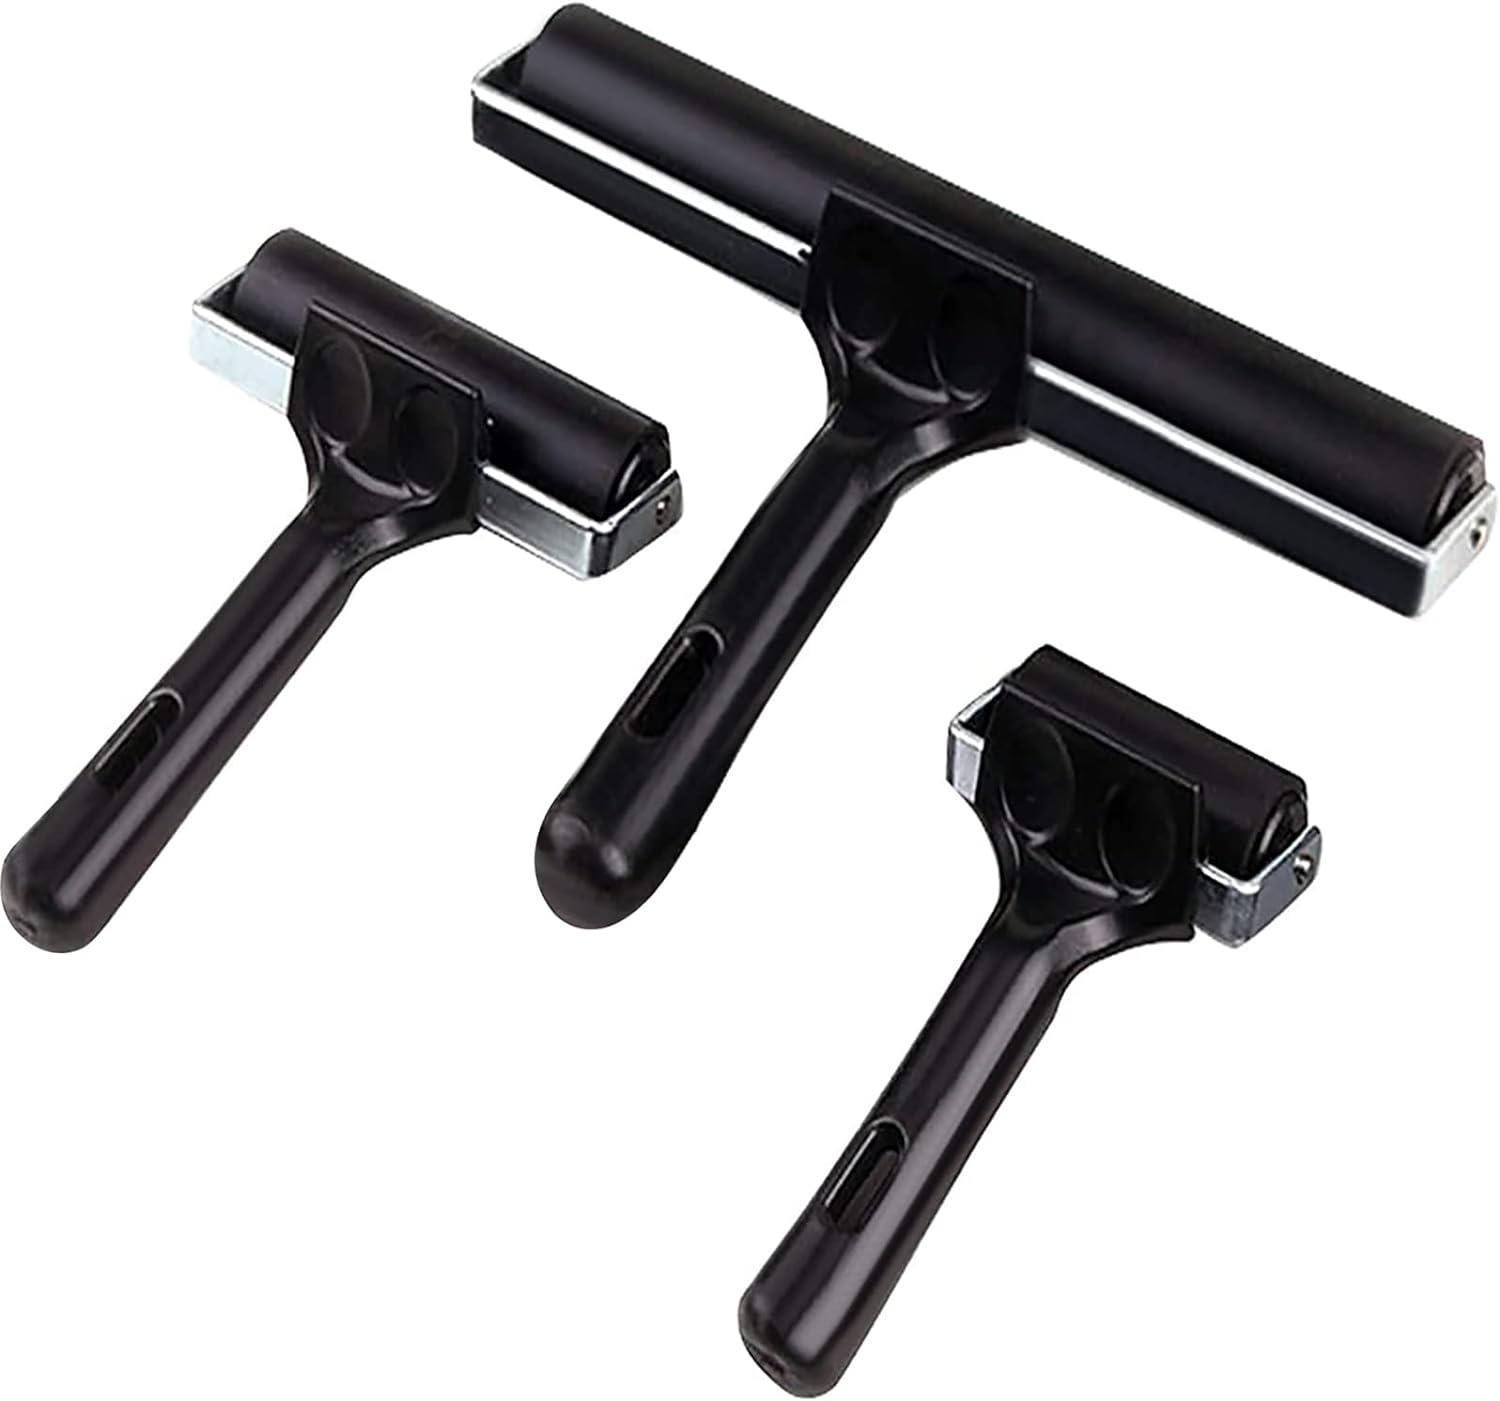  3 Pack Brayer Rollers for Crafting, Vinyl Rubber